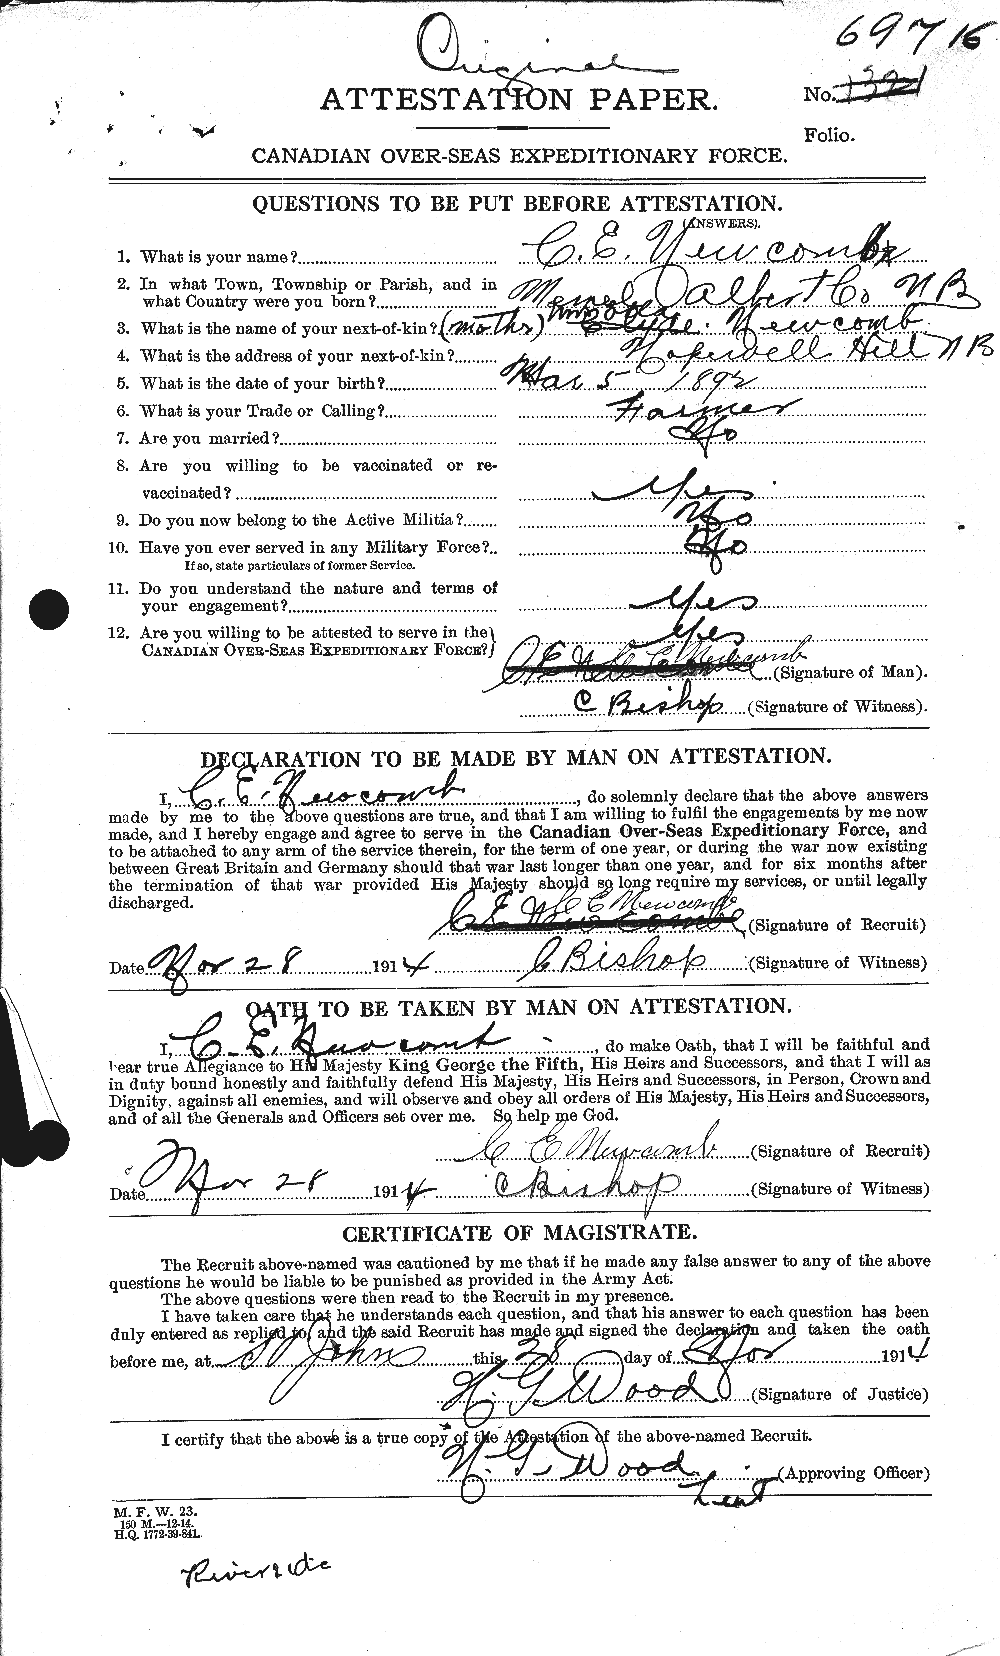 Personnel Records of the First World War - CEF 544157a